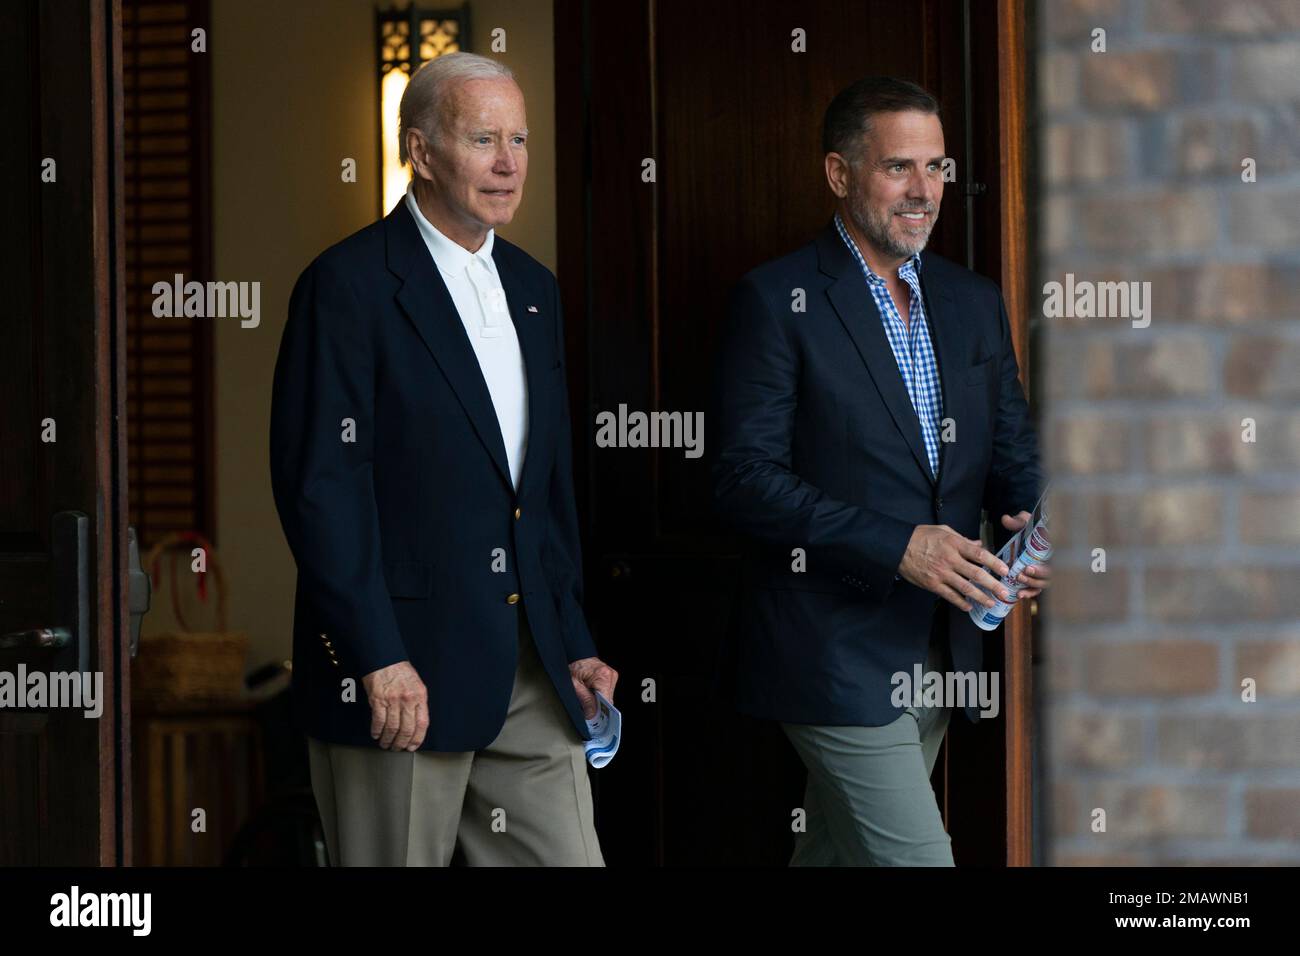 President Joe Biden and his son Hunter Bidden leave Holy Spirit Catholic Church in Johns Island, S.C., after attending a Mass, Saturday, Aug. 13, 2022. Biden is in Kiawah Island with his family on vacation. (AP Photo/Manuel Balce Ceneta) Stock Photo